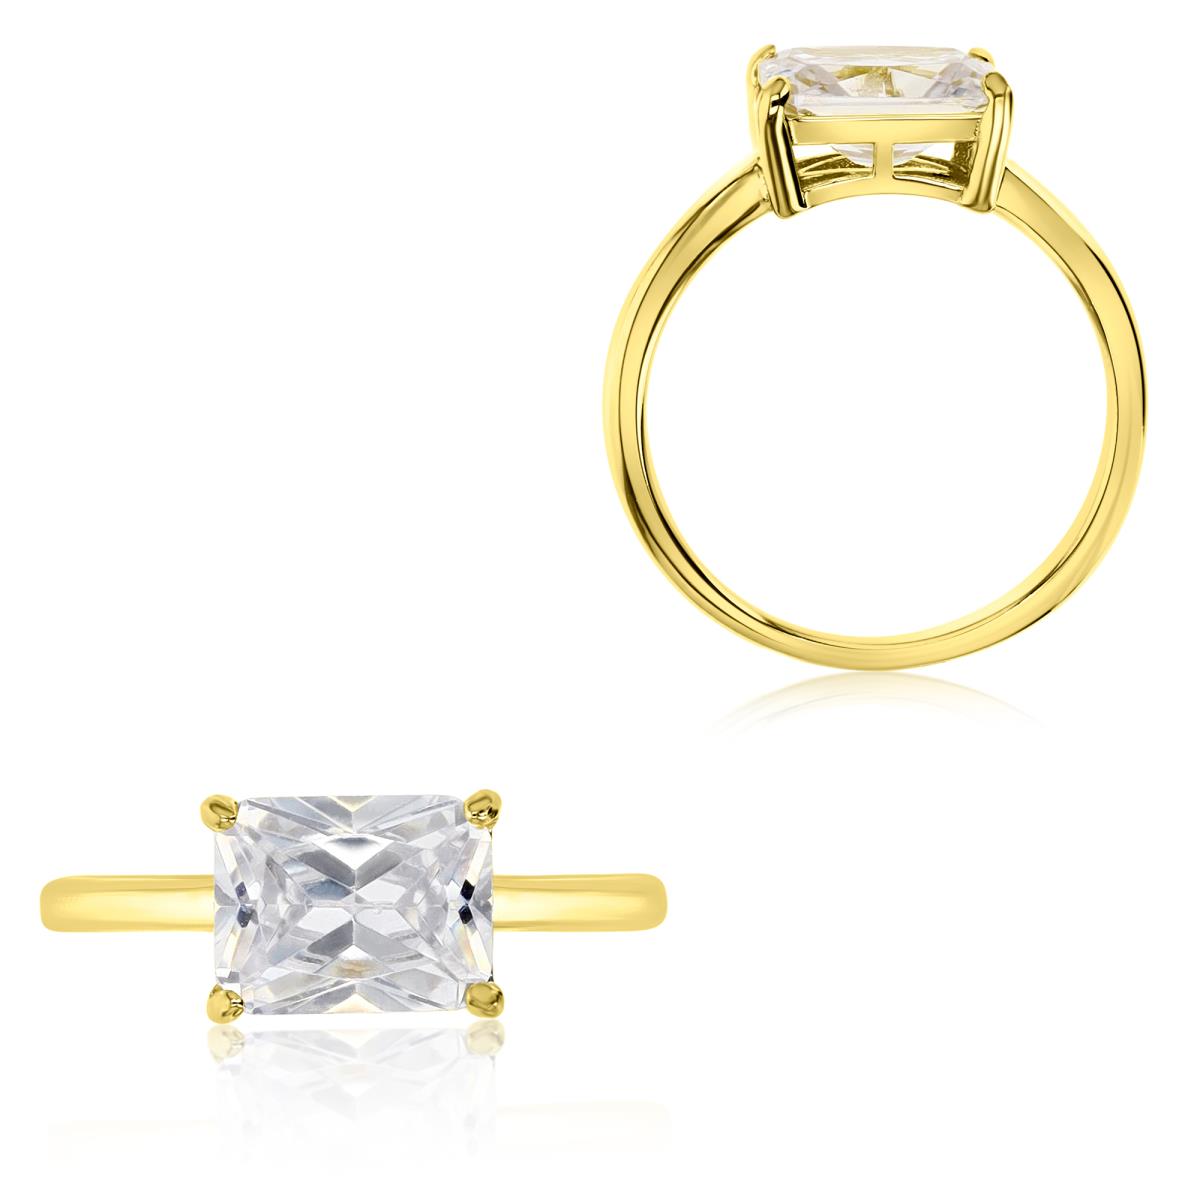 Sterling Silver Yellow 9X7MM Polished White Cz Emerald Cut 4 Prong Solitaire Engagement Ring